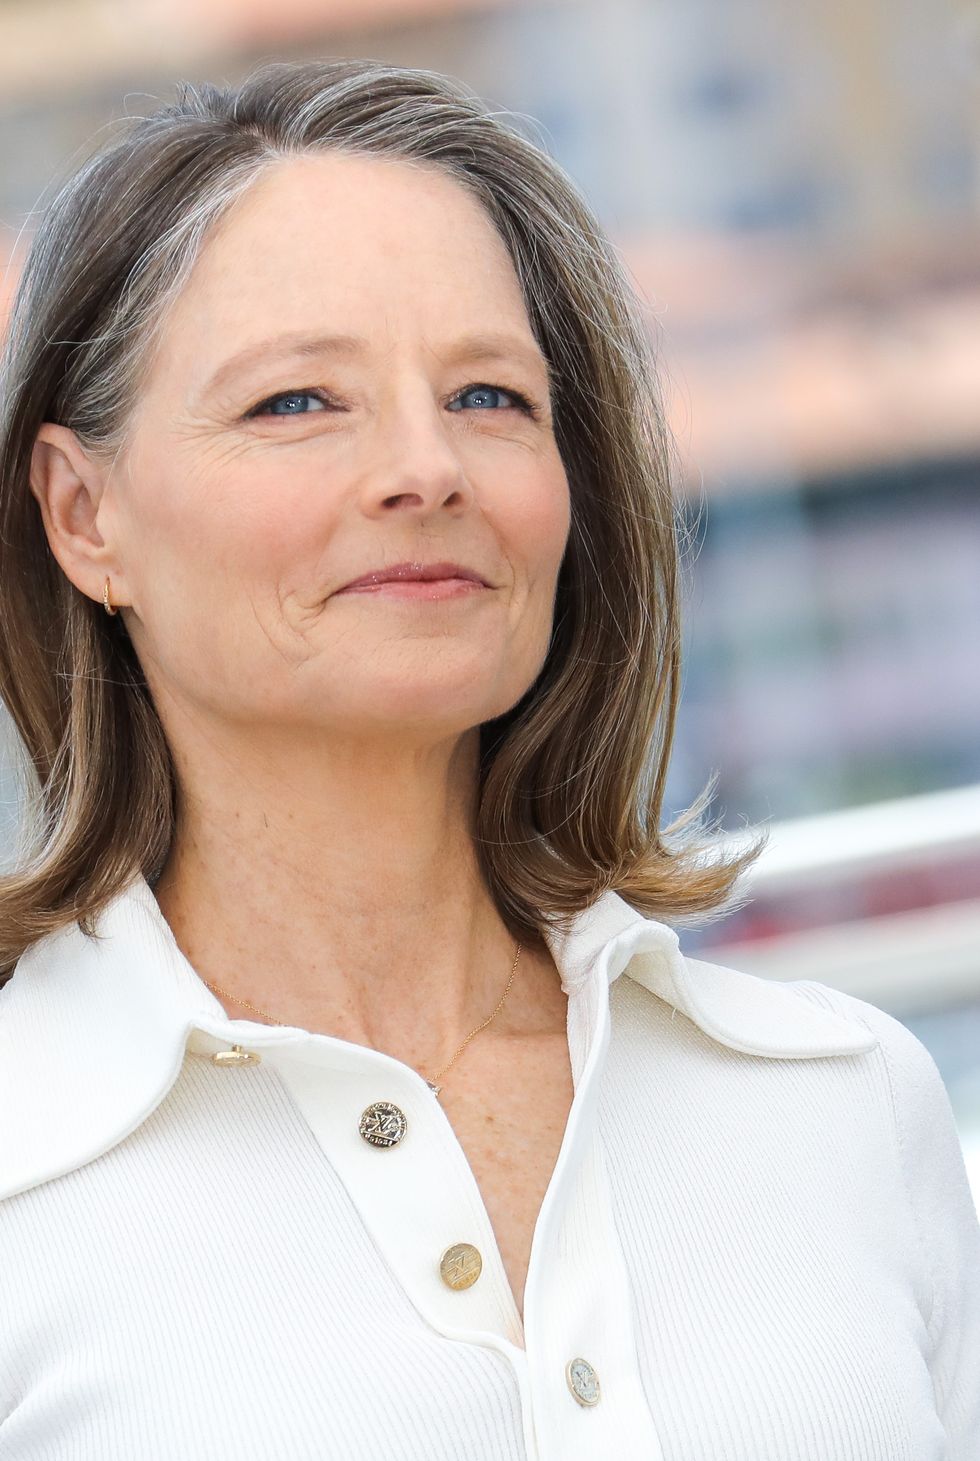 hairstyles for women over 50 jodie foster flipped lob